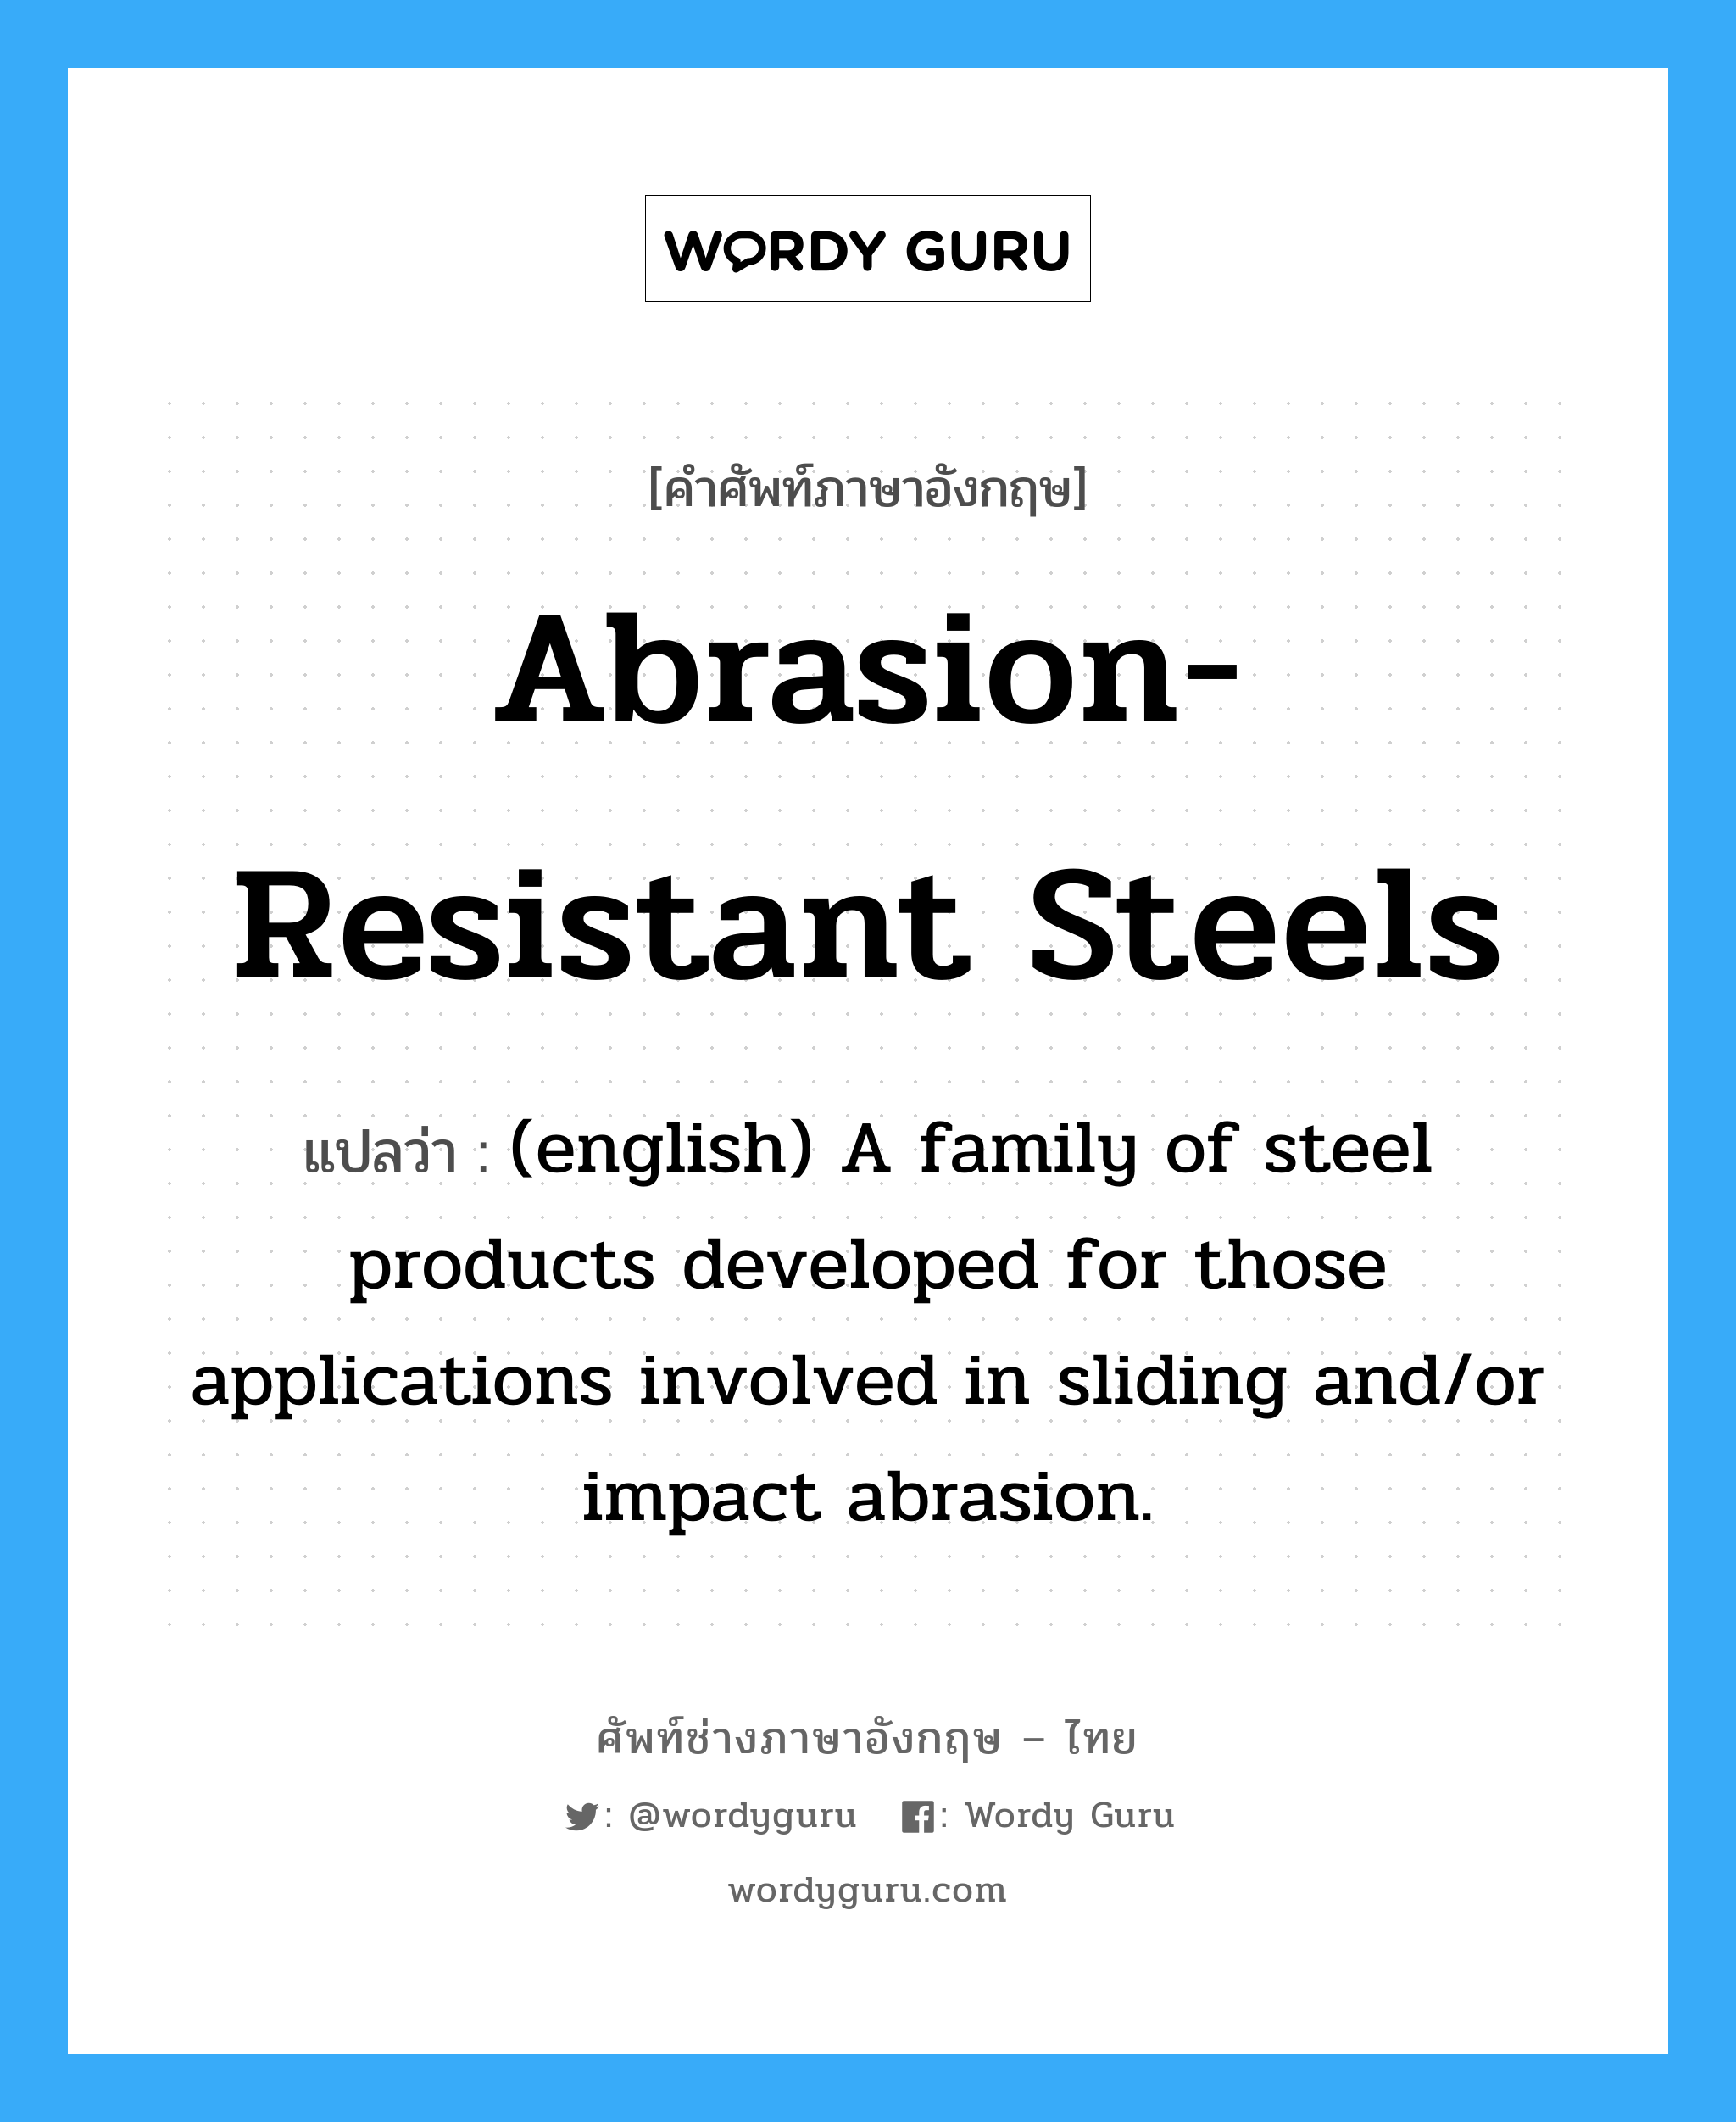 (english) A family of steel products developed for those applications involved in sliding and/or impact abrasion. ภาษาอังกฤษ?, คำศัพท์ช่างภาษาอังกฤษ - ไทย (english) A family of steel products developed for those applications involved in sliding and/or impact abrasion. คำศัพท์ภาษาอังกฤษ (english) A family of steel products developed for those applications involved in sliding and/or impact abrasion. แปลว่า Abrasion-Resistant Steels